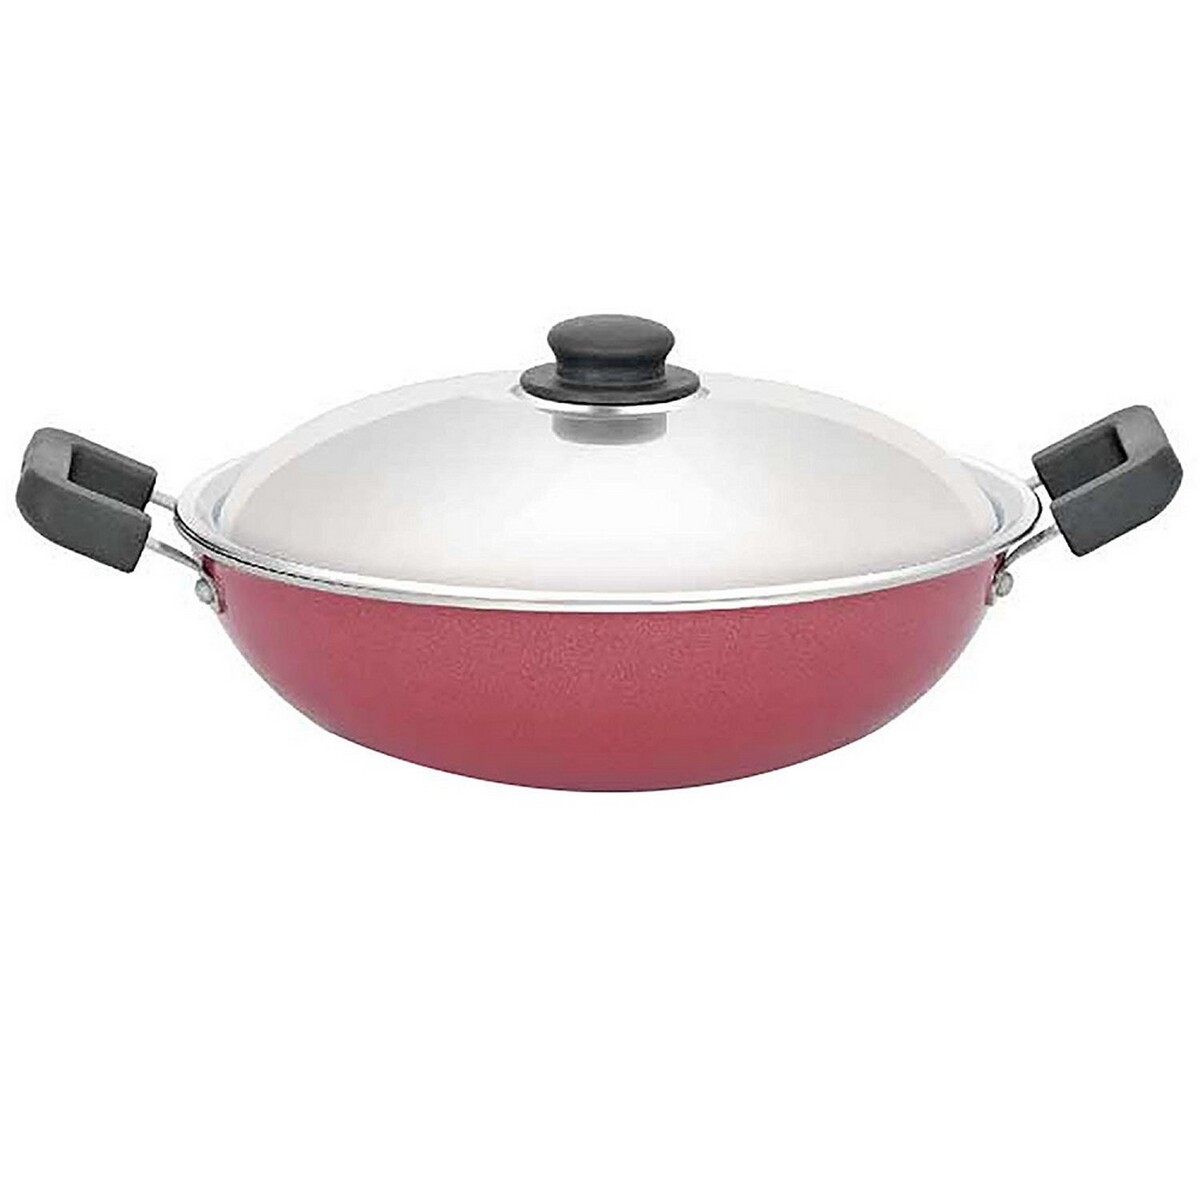 Cooking Pan,Deep Fry Kadai Non-Stick Kadai with Stainless Steel Lid 2 Litres Free Scrubber & Paddle Red ,Valentine Day Gifts Non-Stick Aluminium Kadhai 